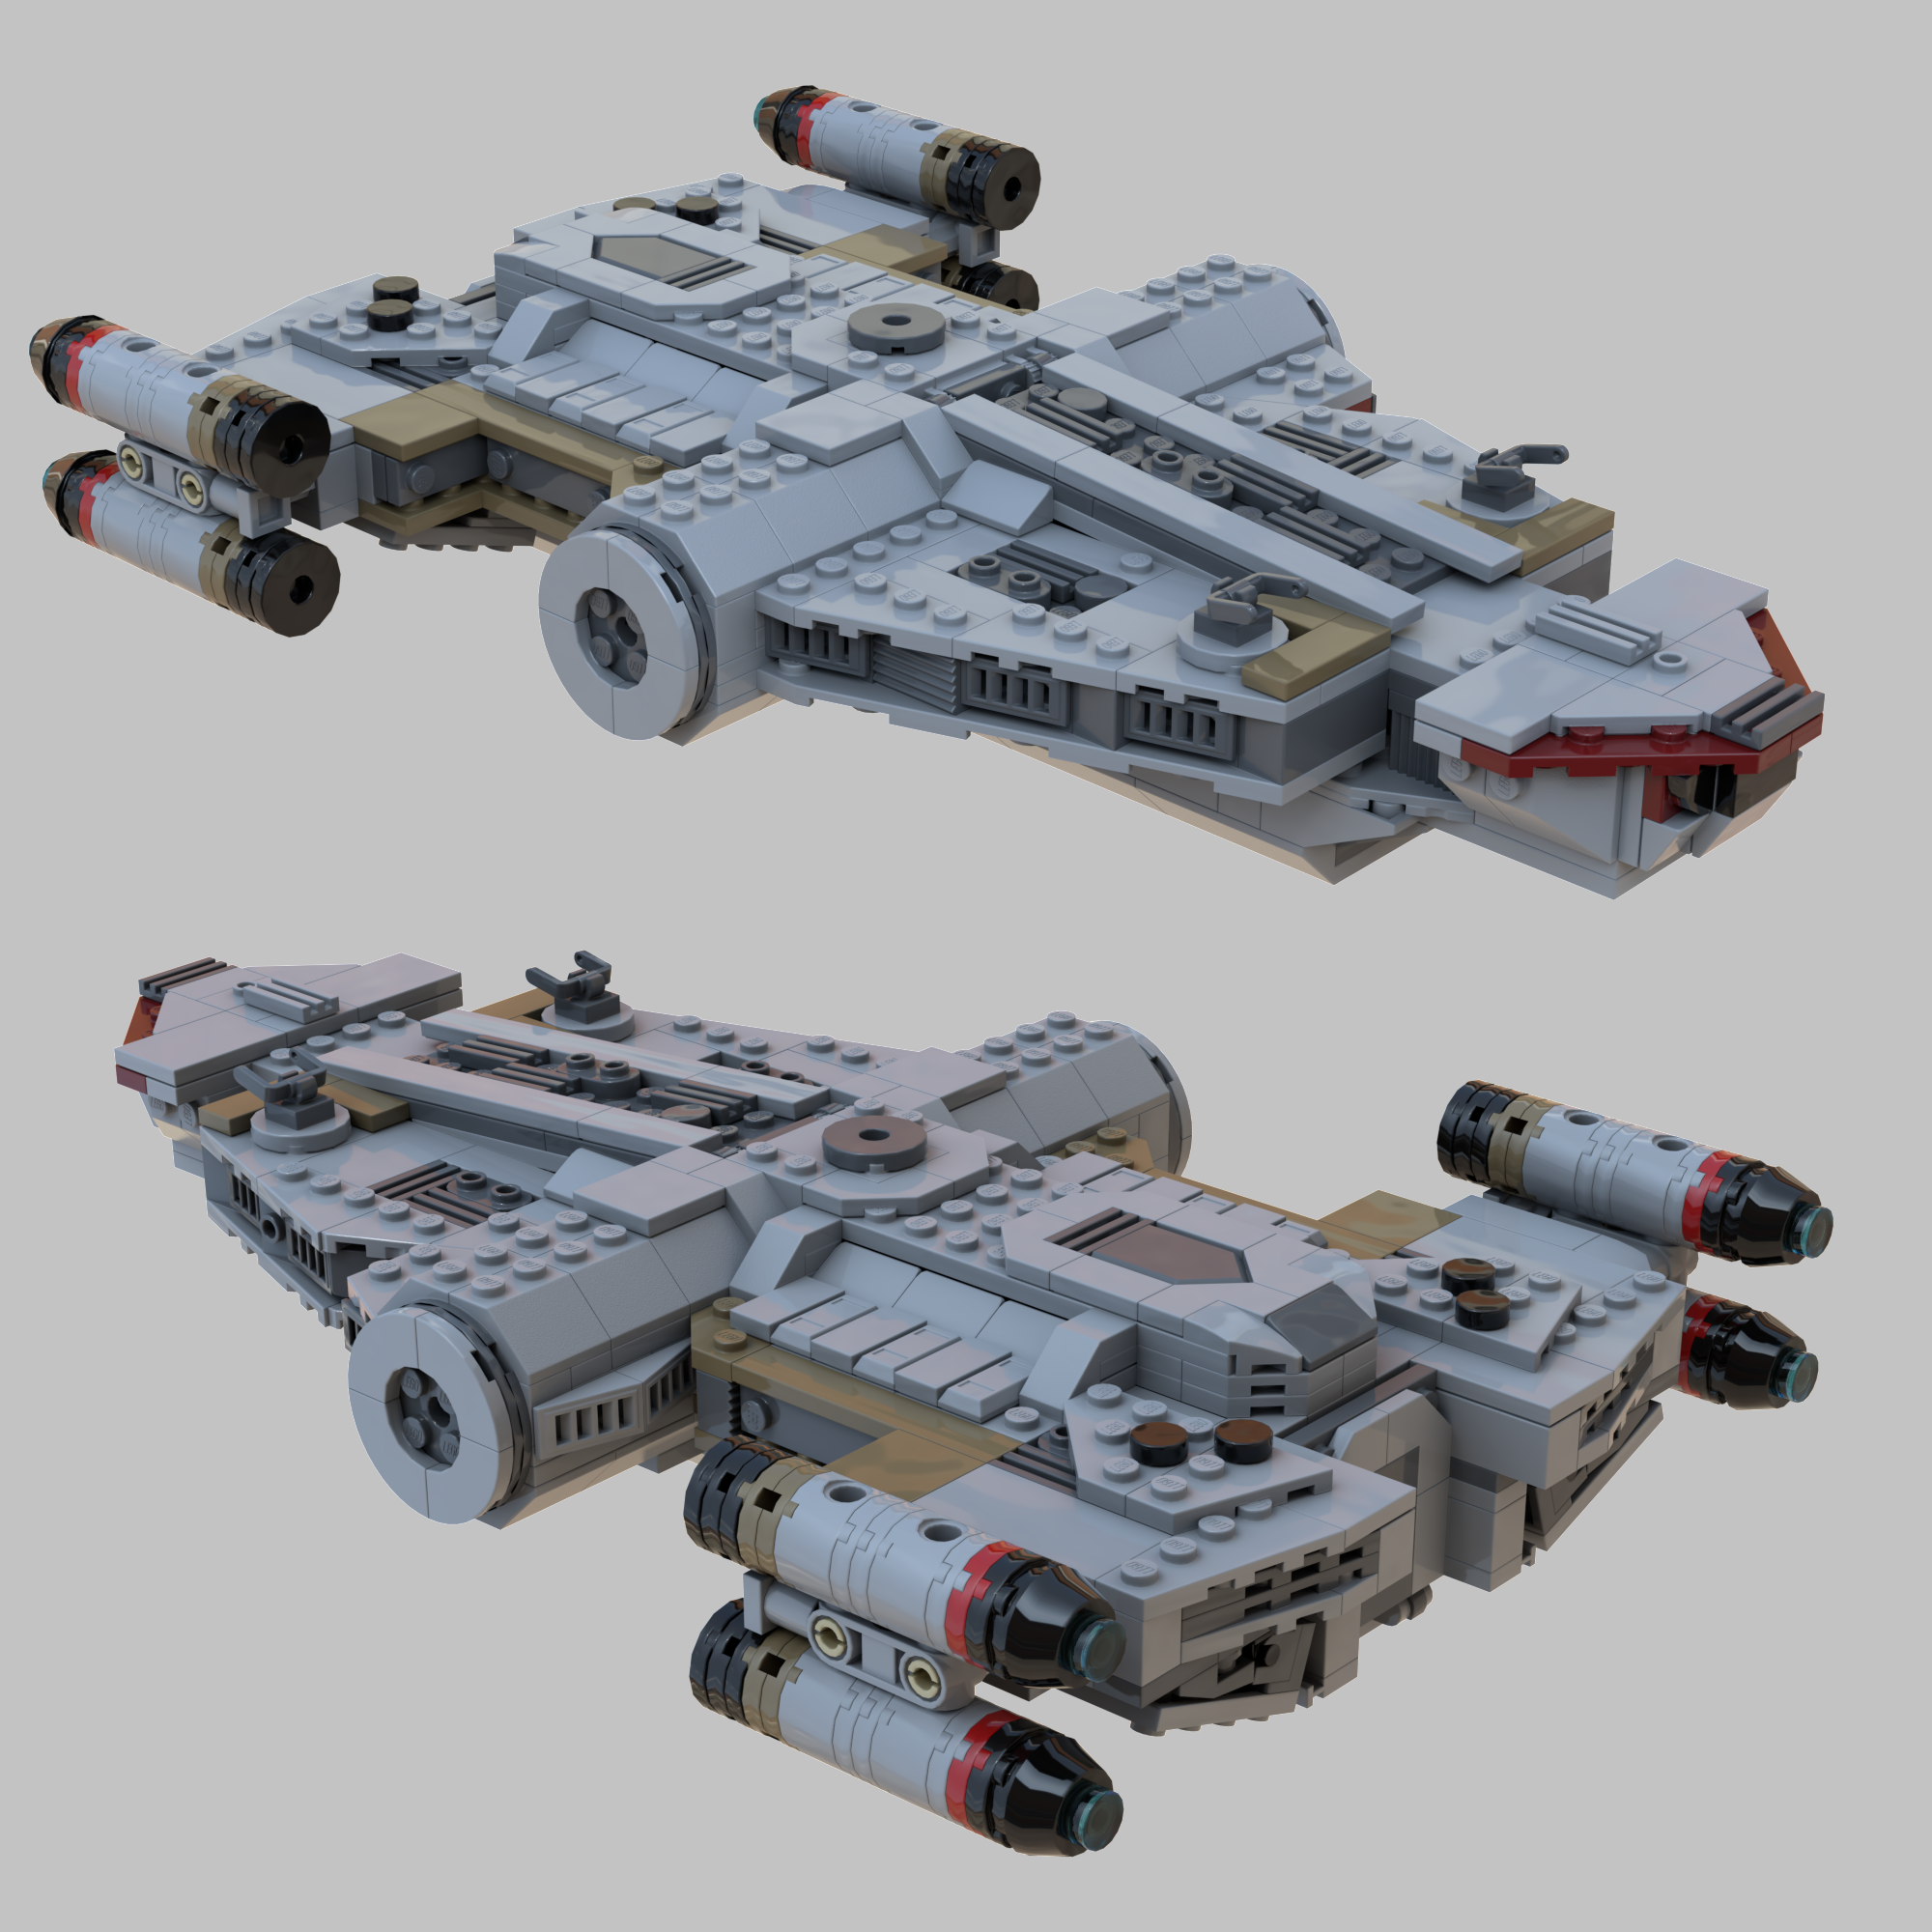 THE REMORA - ROGUE CLONE TRANSPORT - THE BAD BATCH